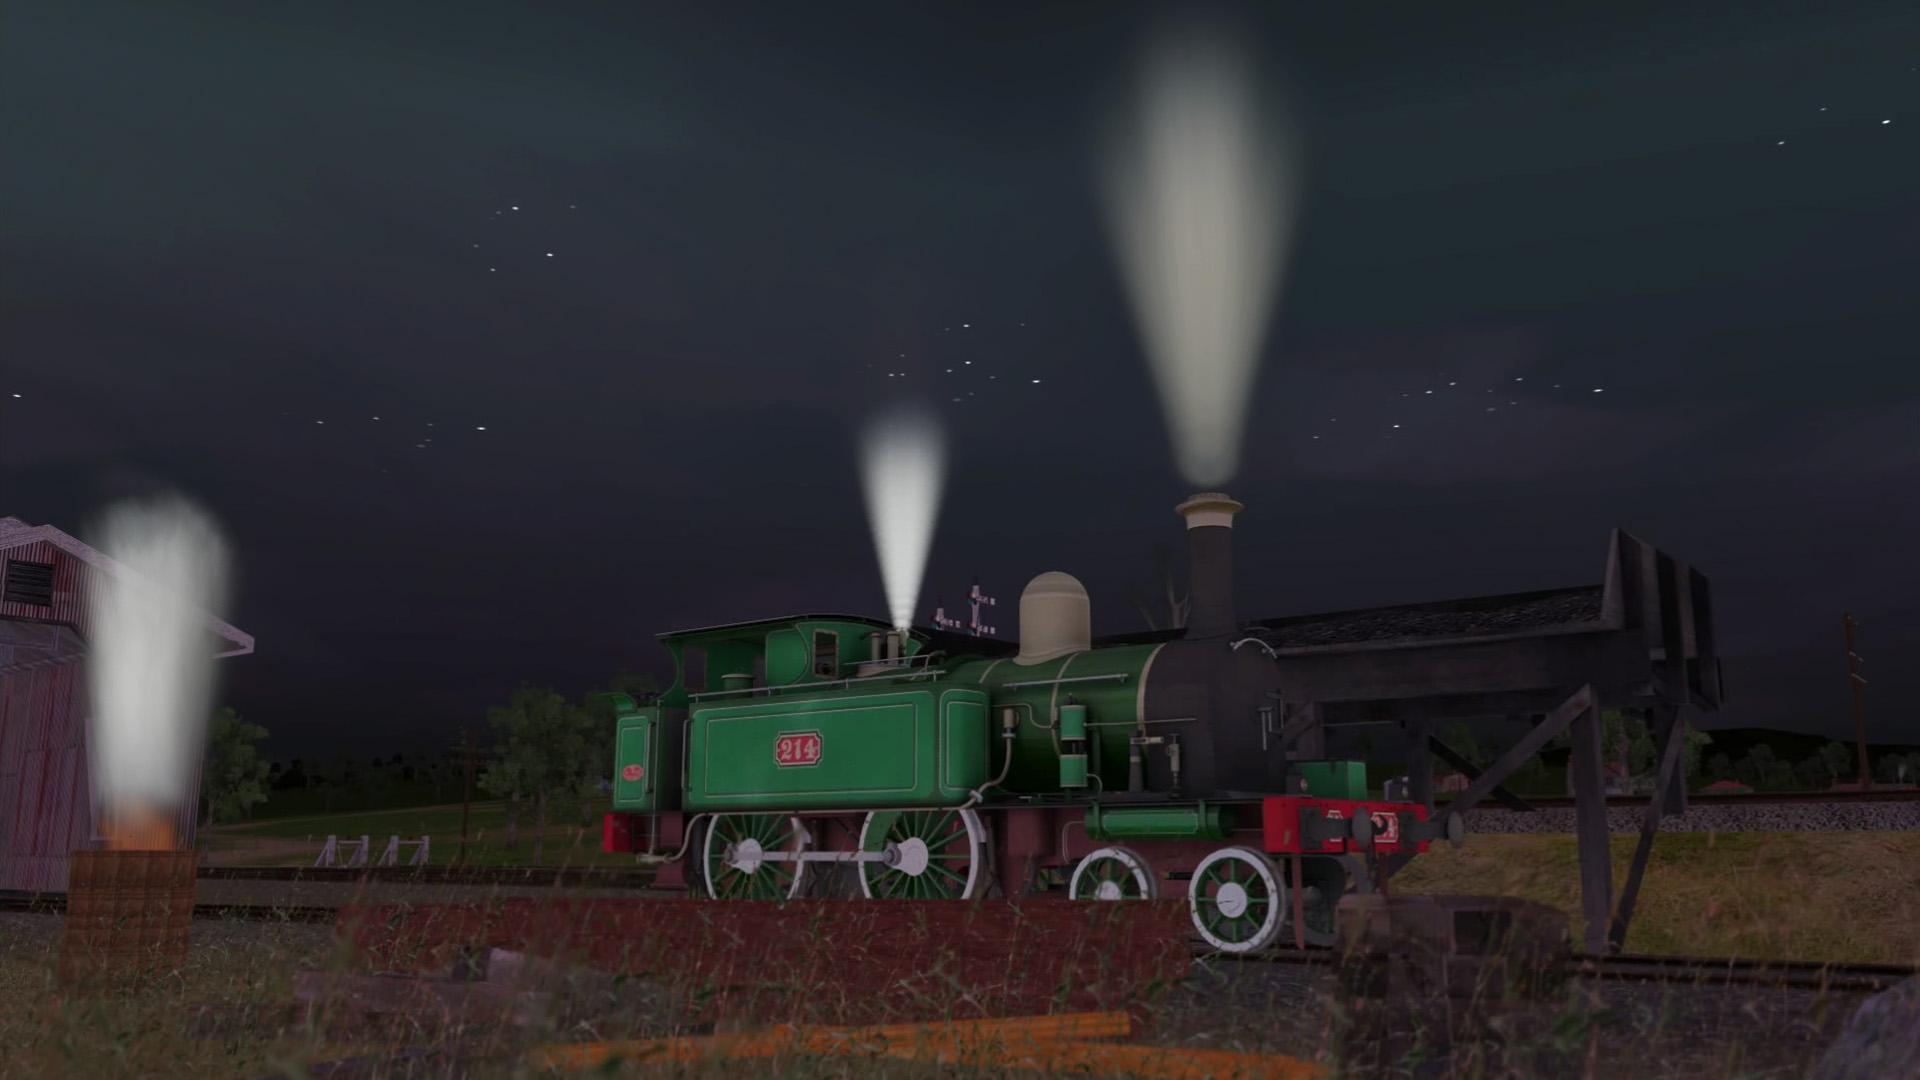 m-class-214-at-lilydale-at-night.jpg